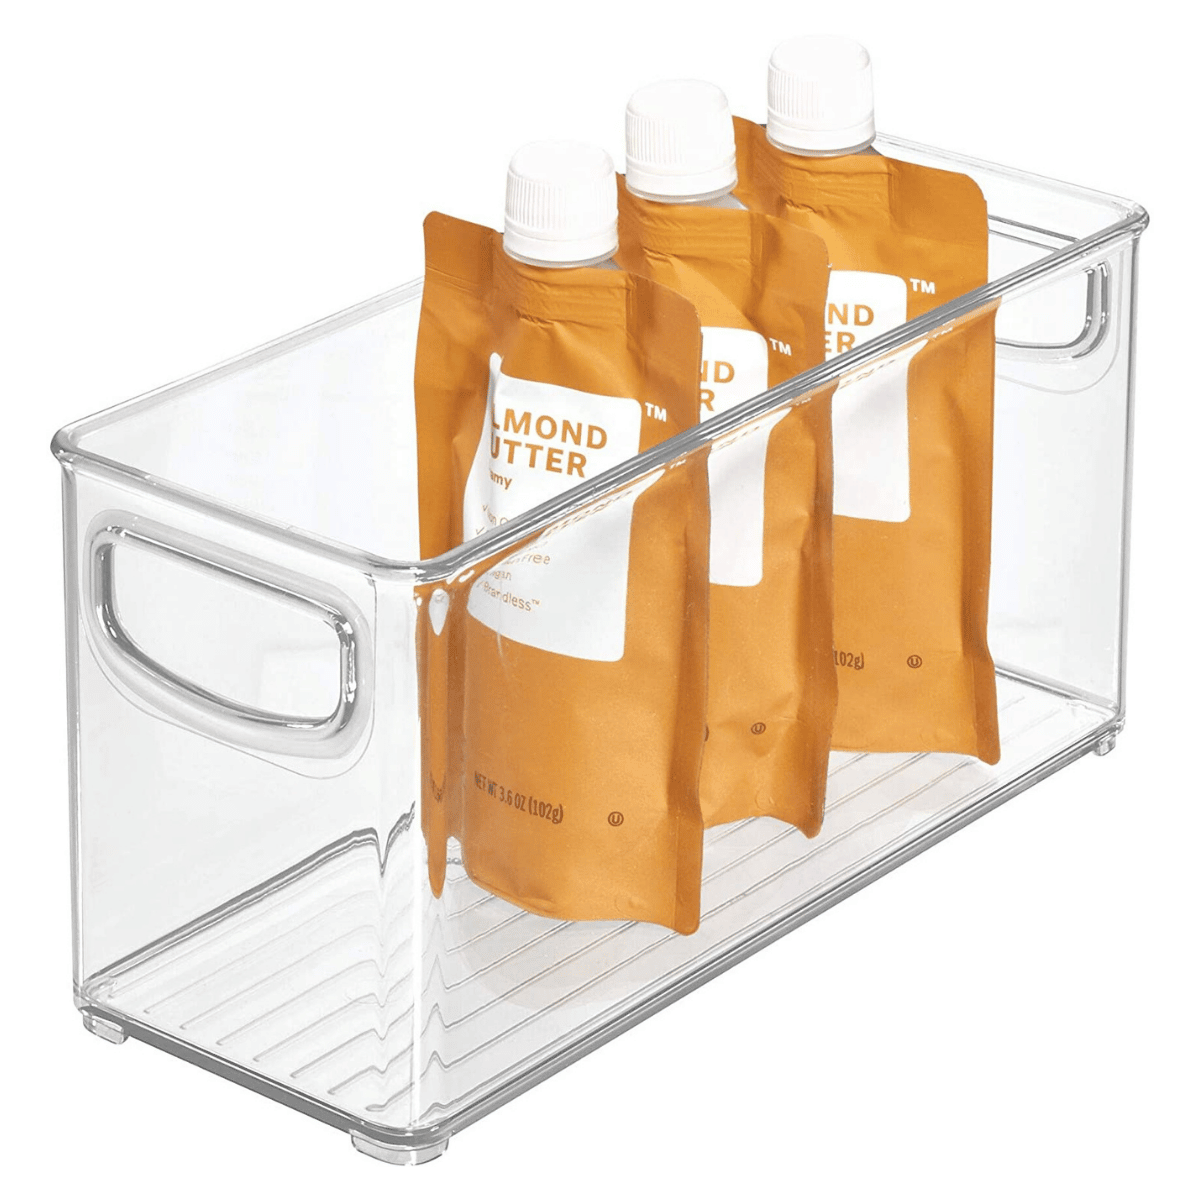 https://healthierspaces.com/wp-content/uploads/2021/09/HealthierSpaces.com-iDesign-Linus-BPA-Free-Plastic-Stackable-Organizer-Storage-Bin-with-Handles-for-Kitchen-Pantry-Bathroom-Small-1.png